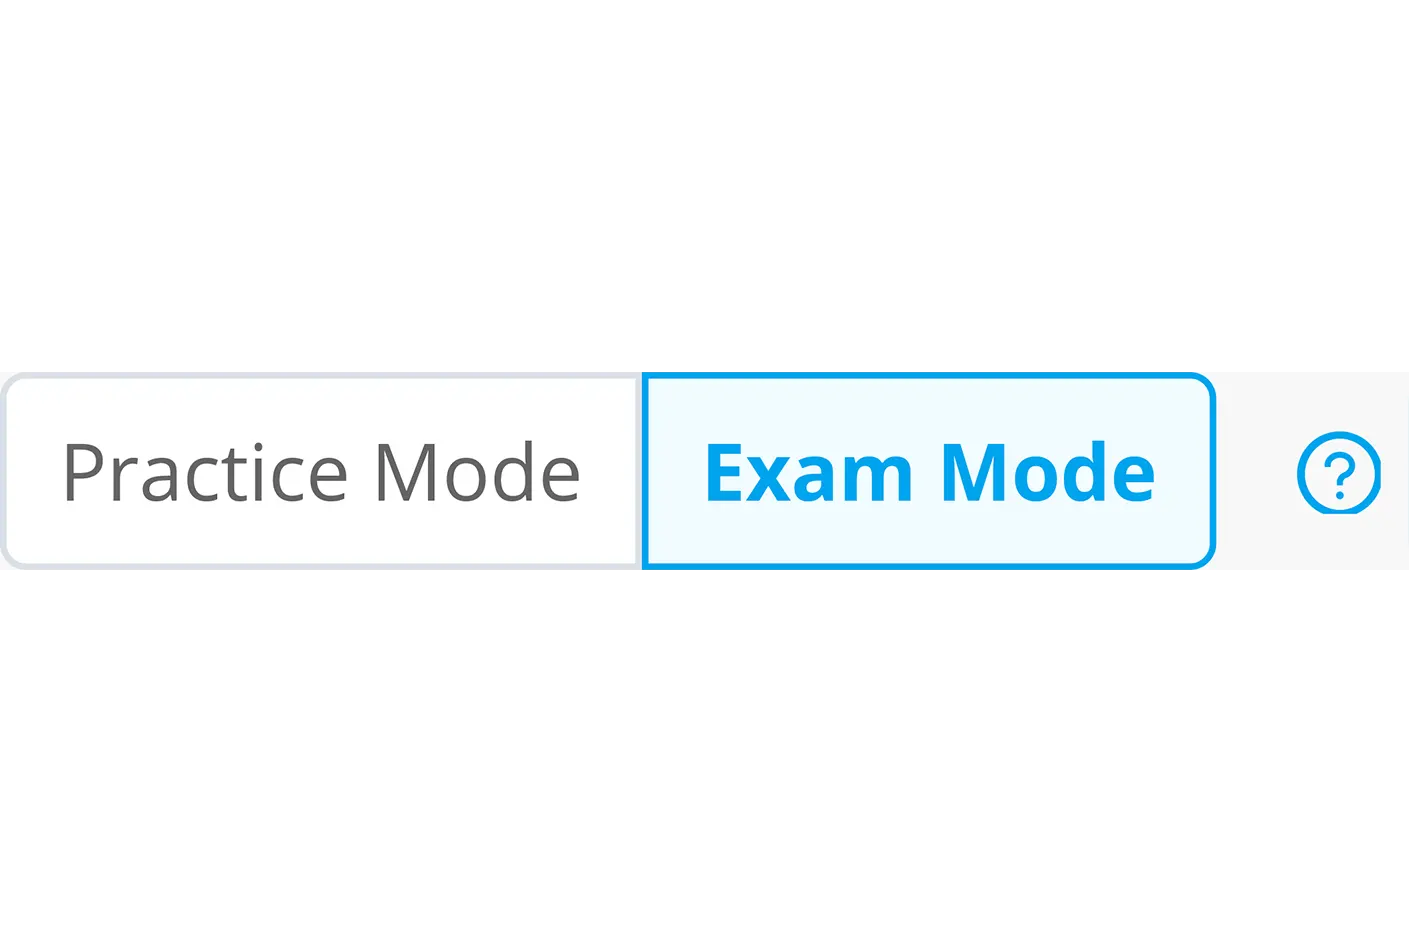 There is a screenshot of exam mode select for School Exam practice test